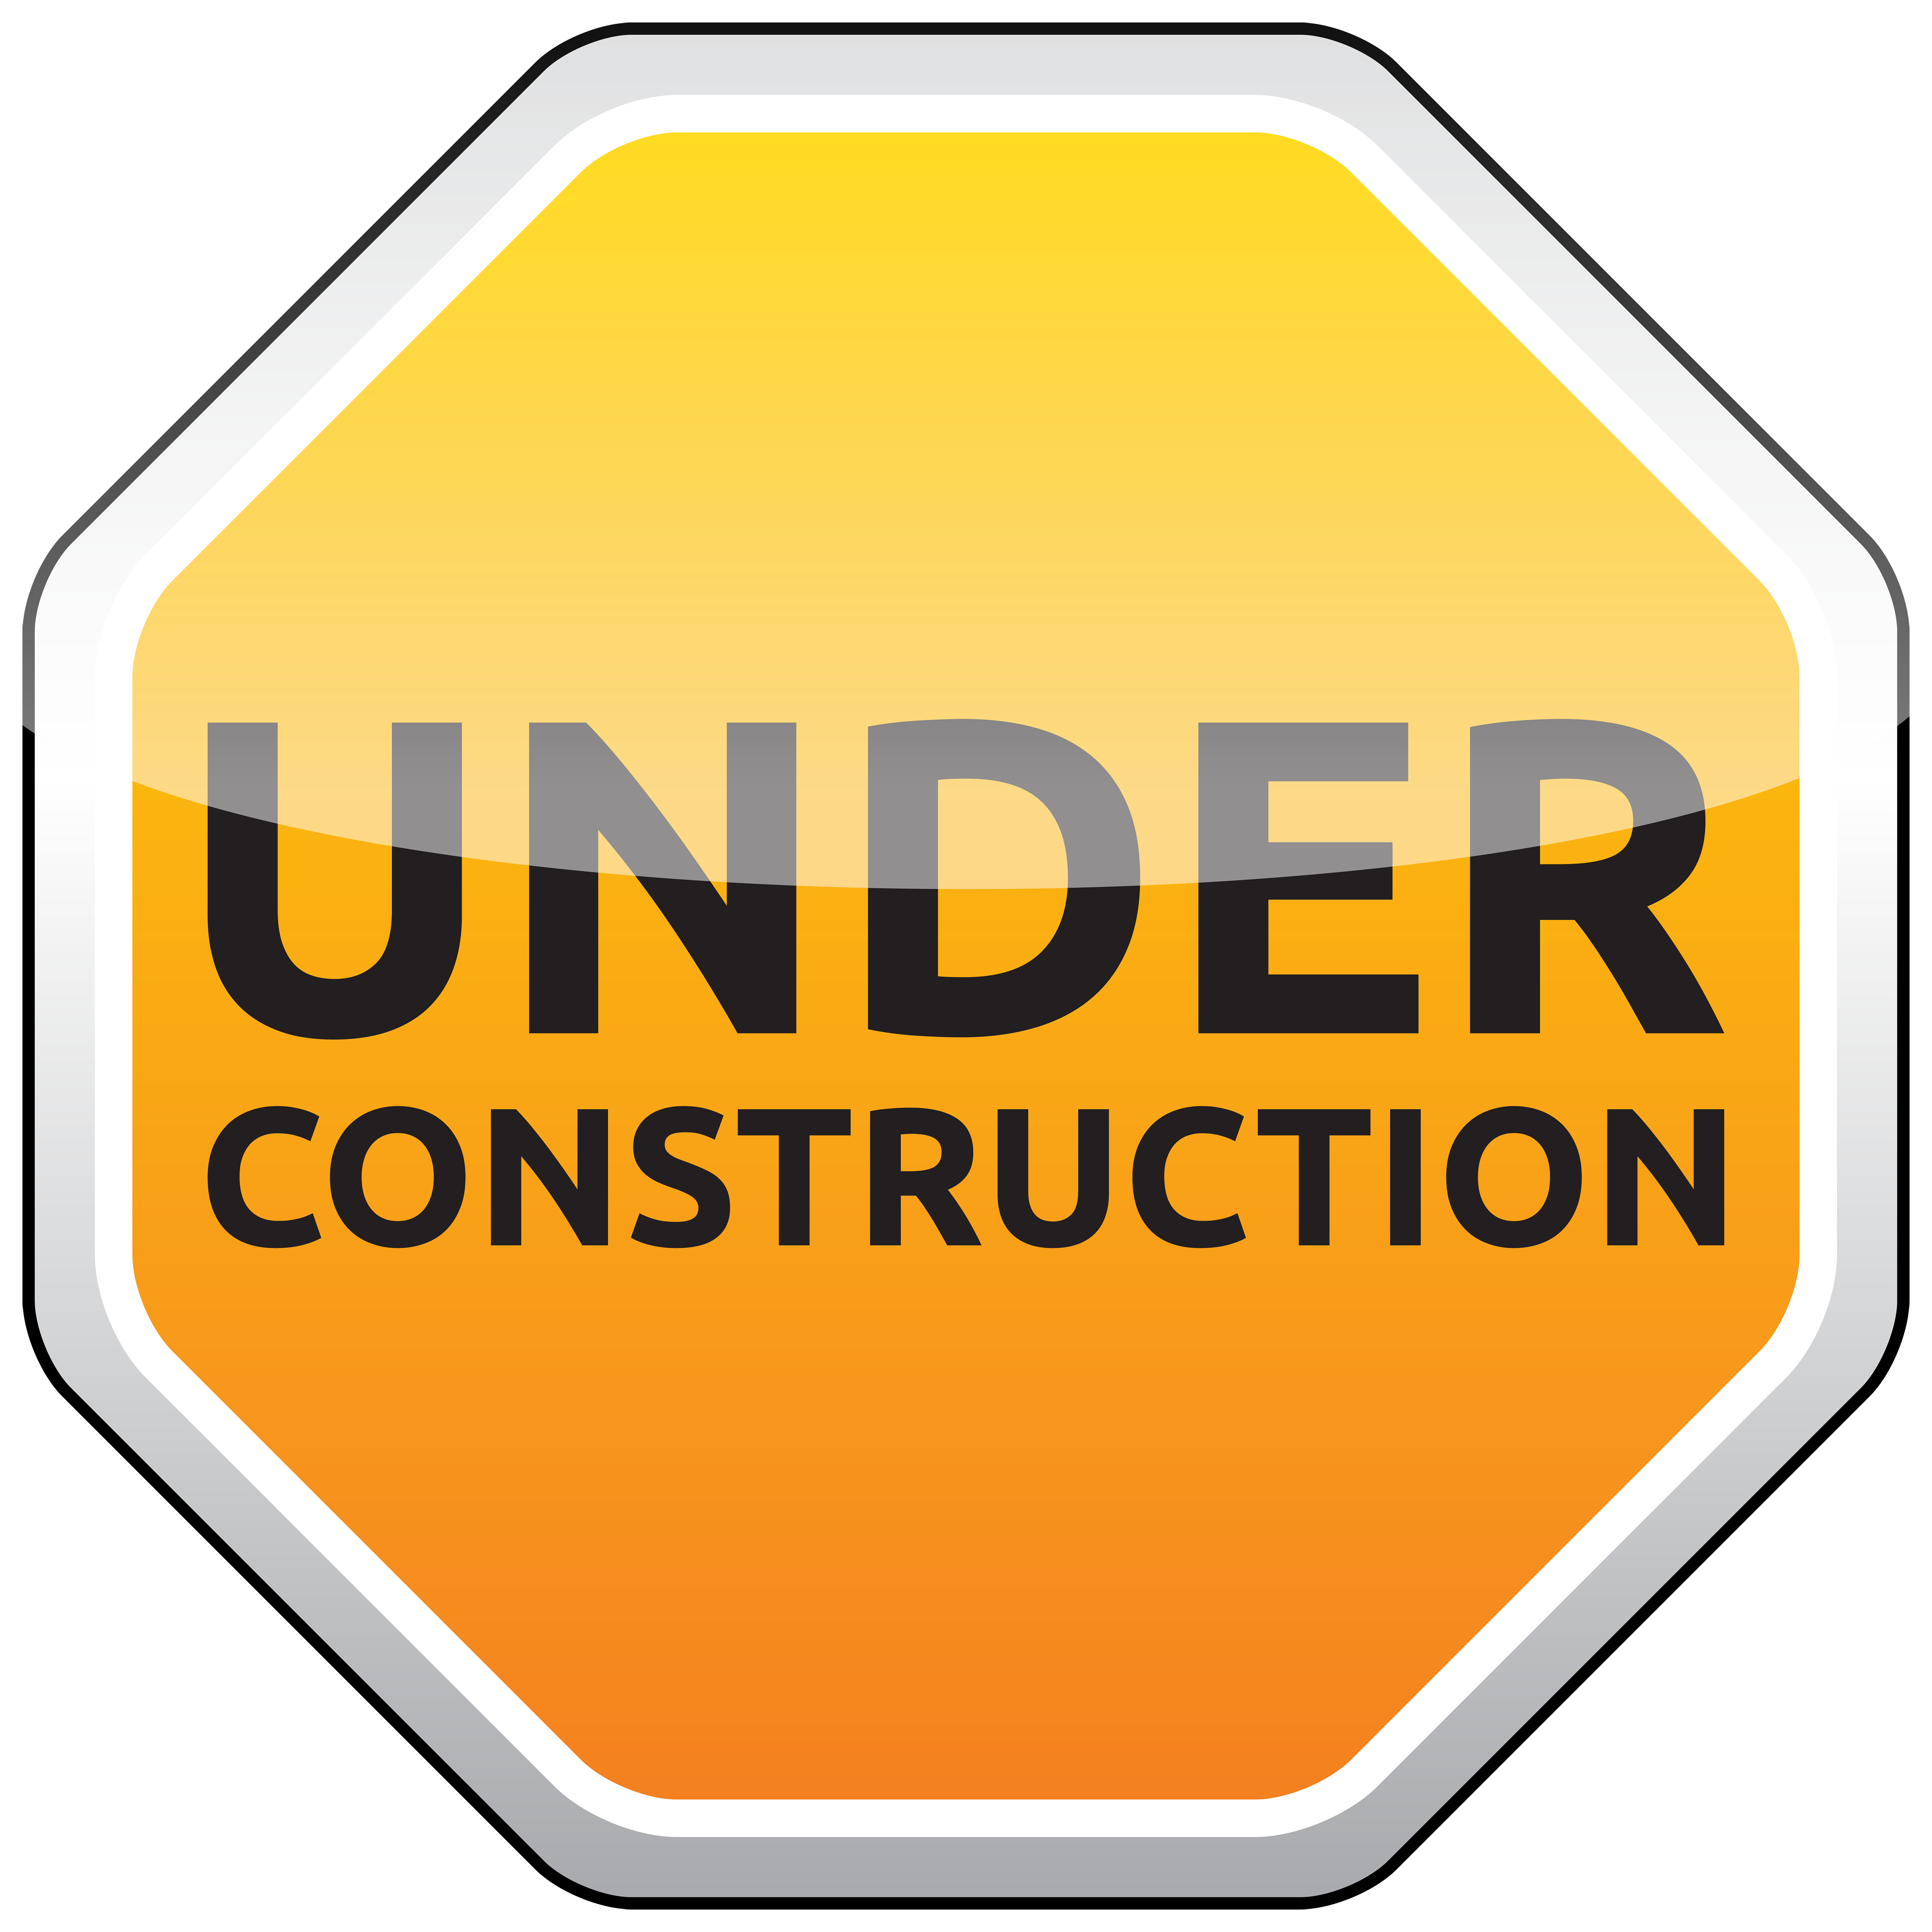 Under Construction Sign PNG Clipart.